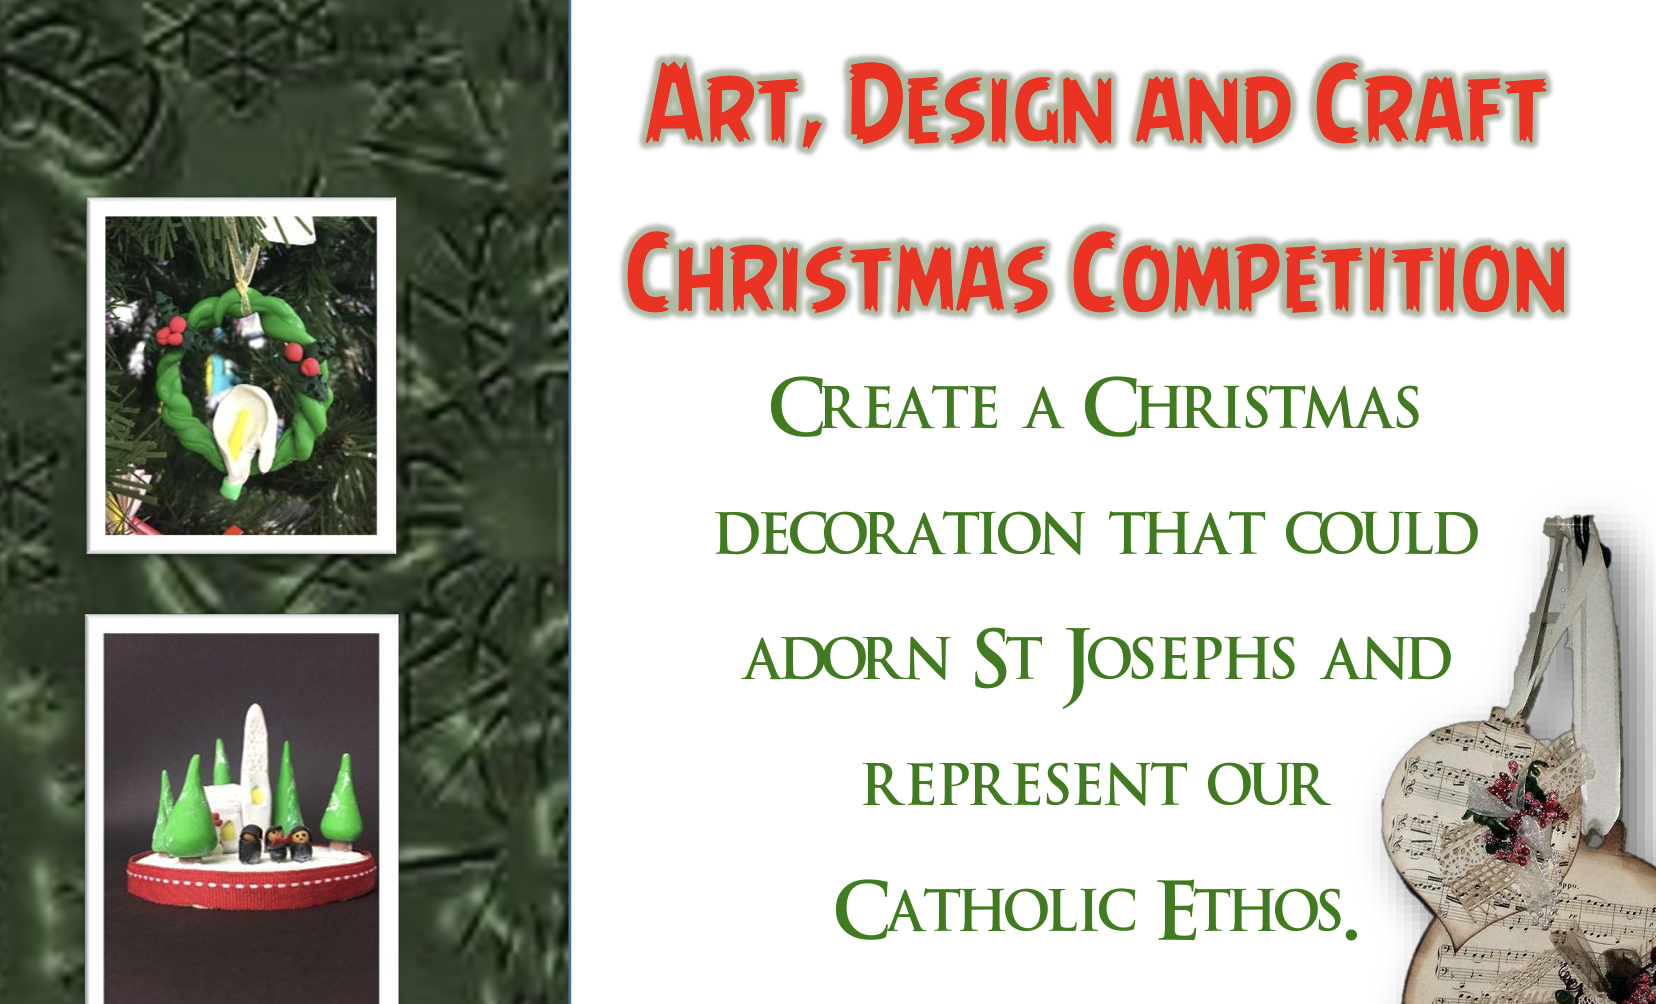 Featured image for “Get Creative with Our Art, Design & Craft Christmas Competition!”